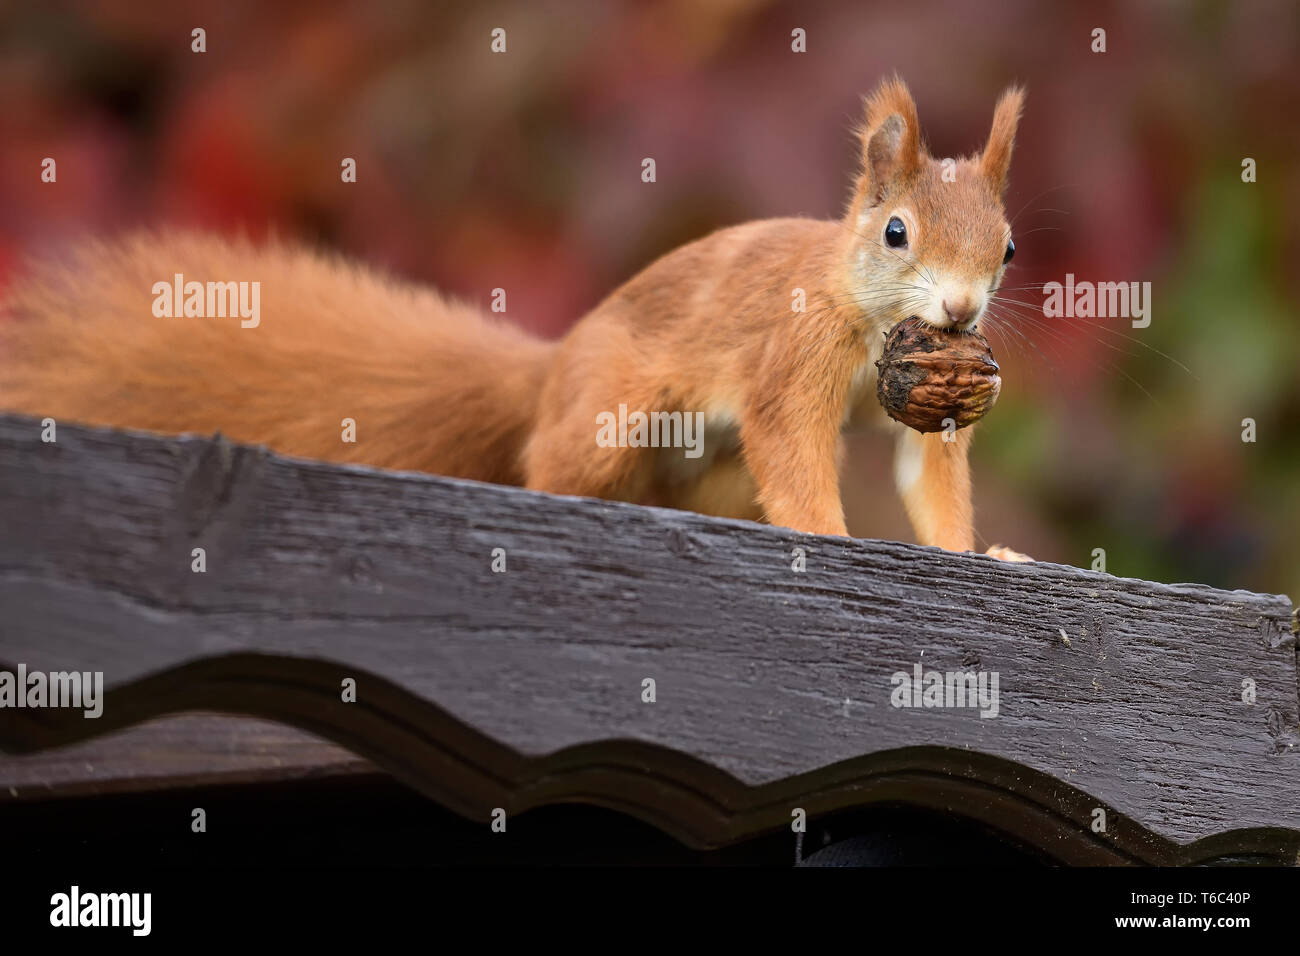 Red Squirrel with a walnut Stock Photo